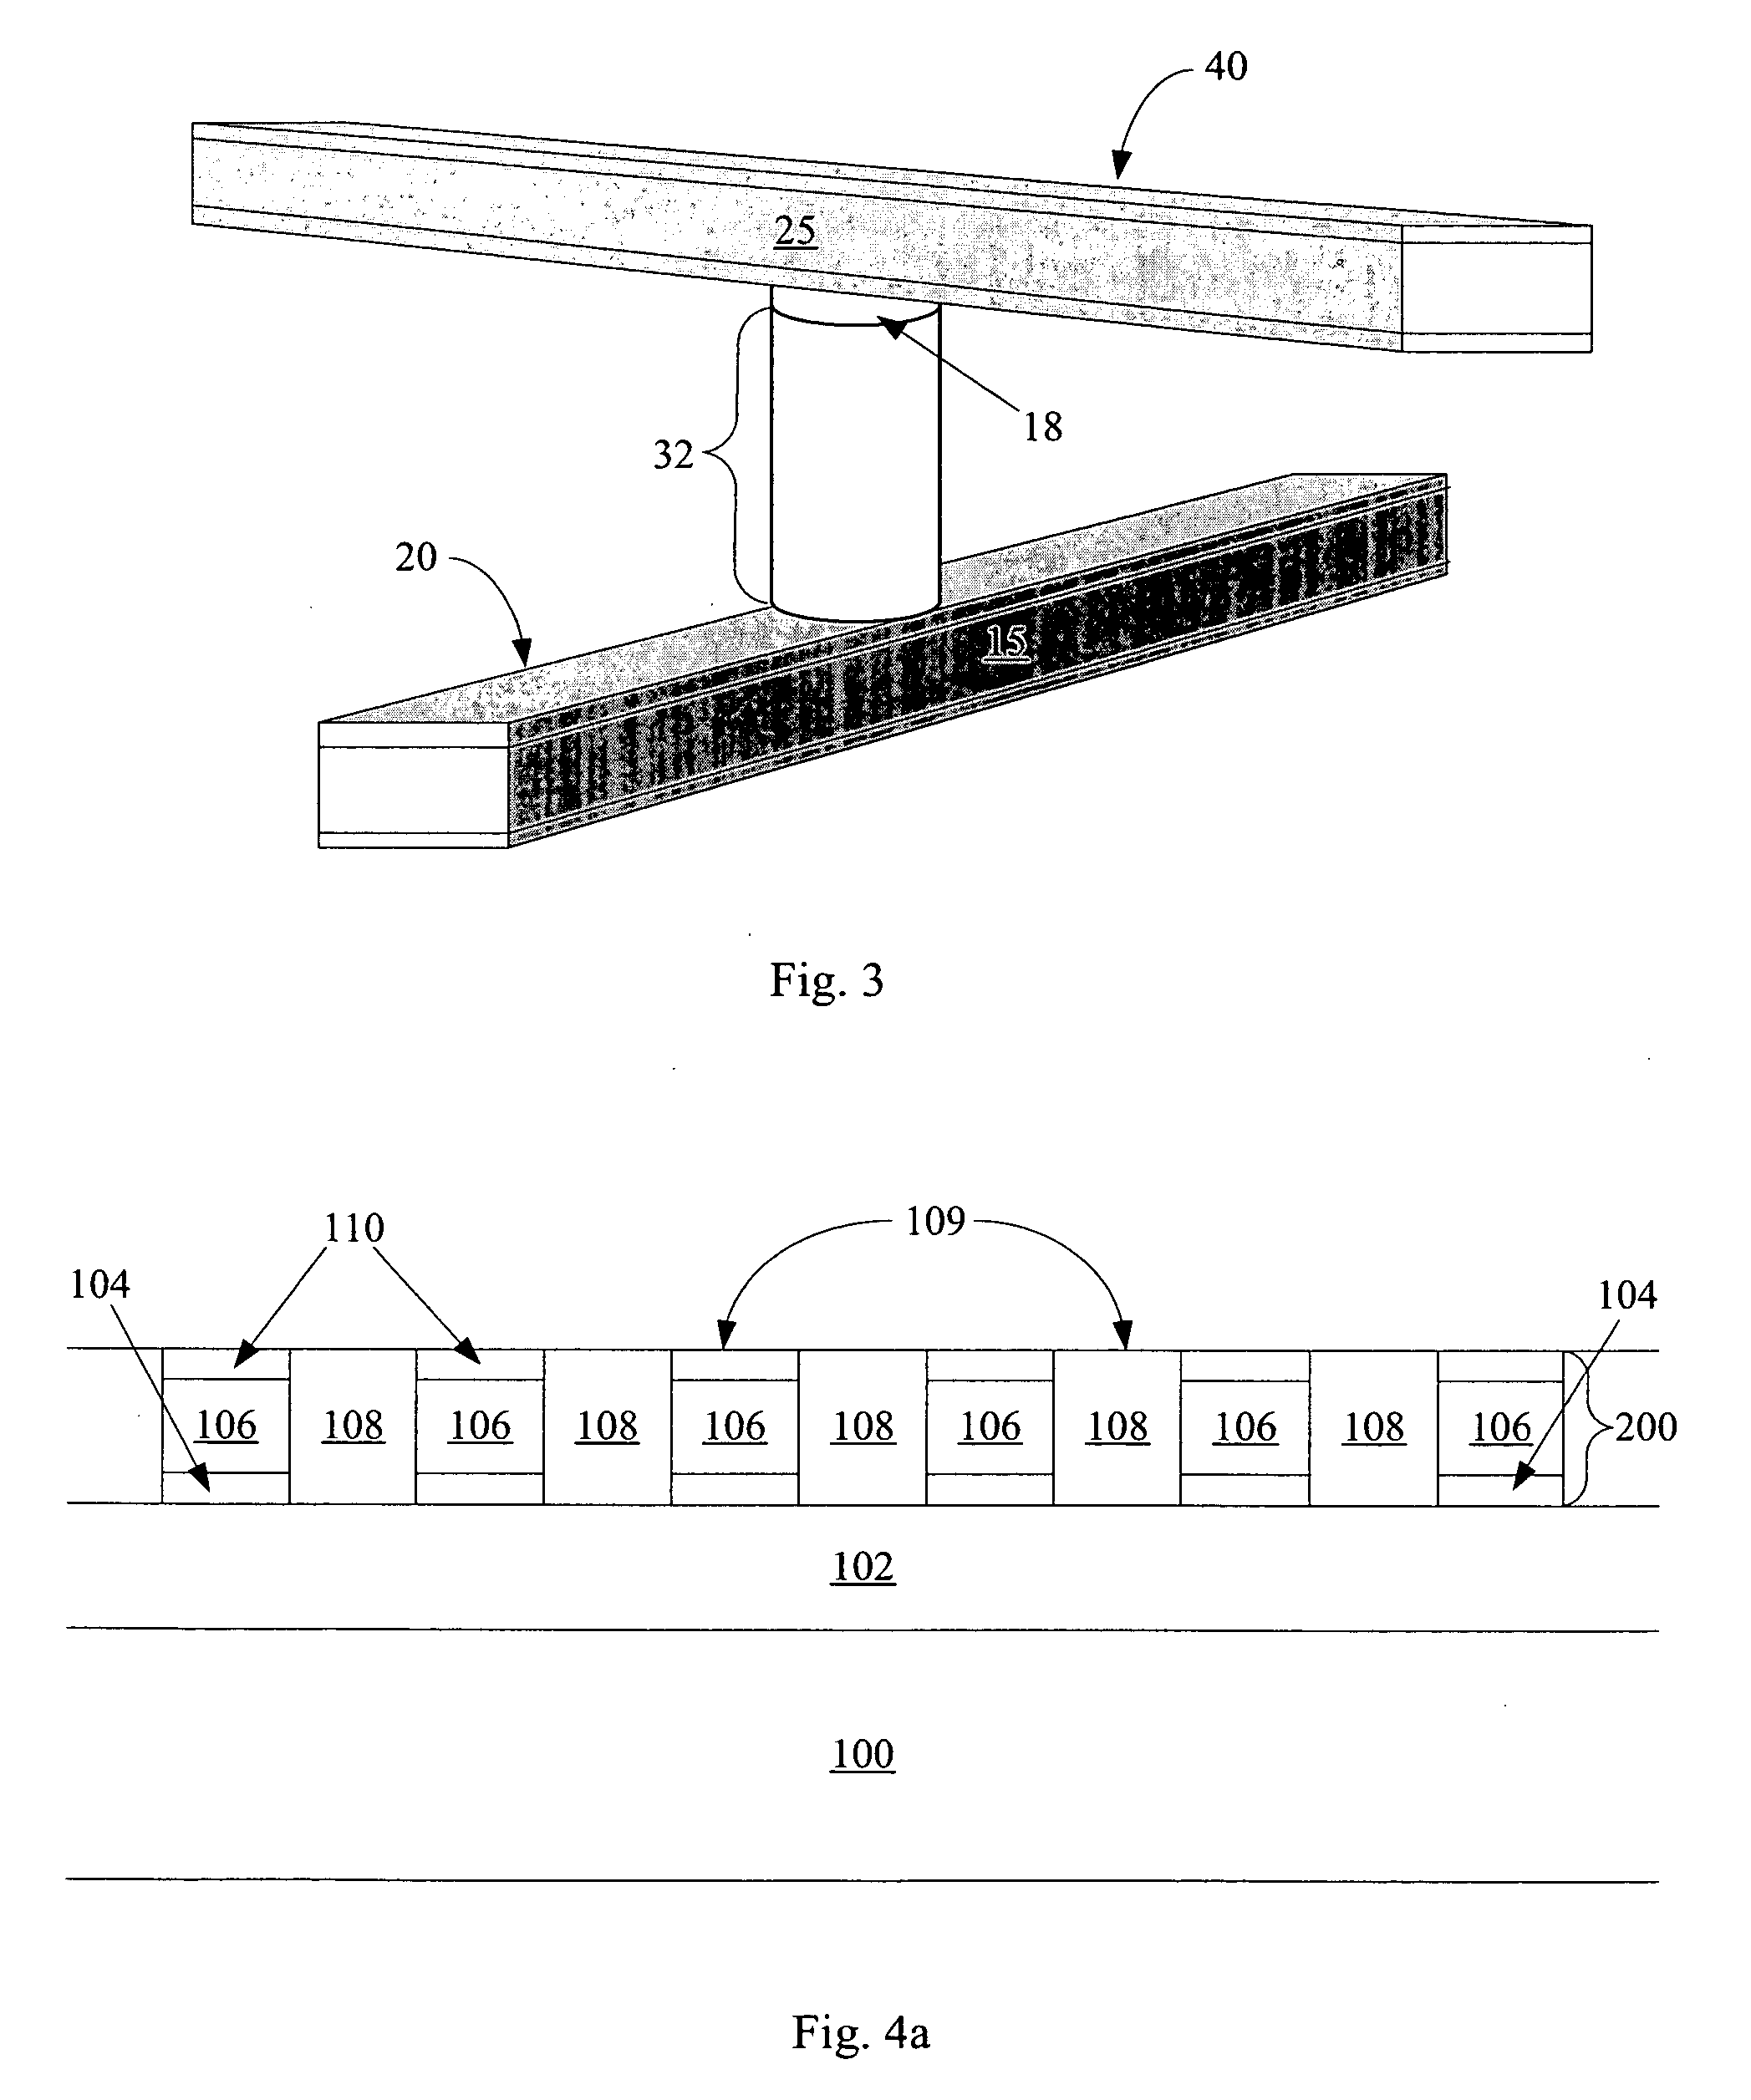 High-density nonvolatile memory array fabricated at low temperature comprising semiconductor diodes